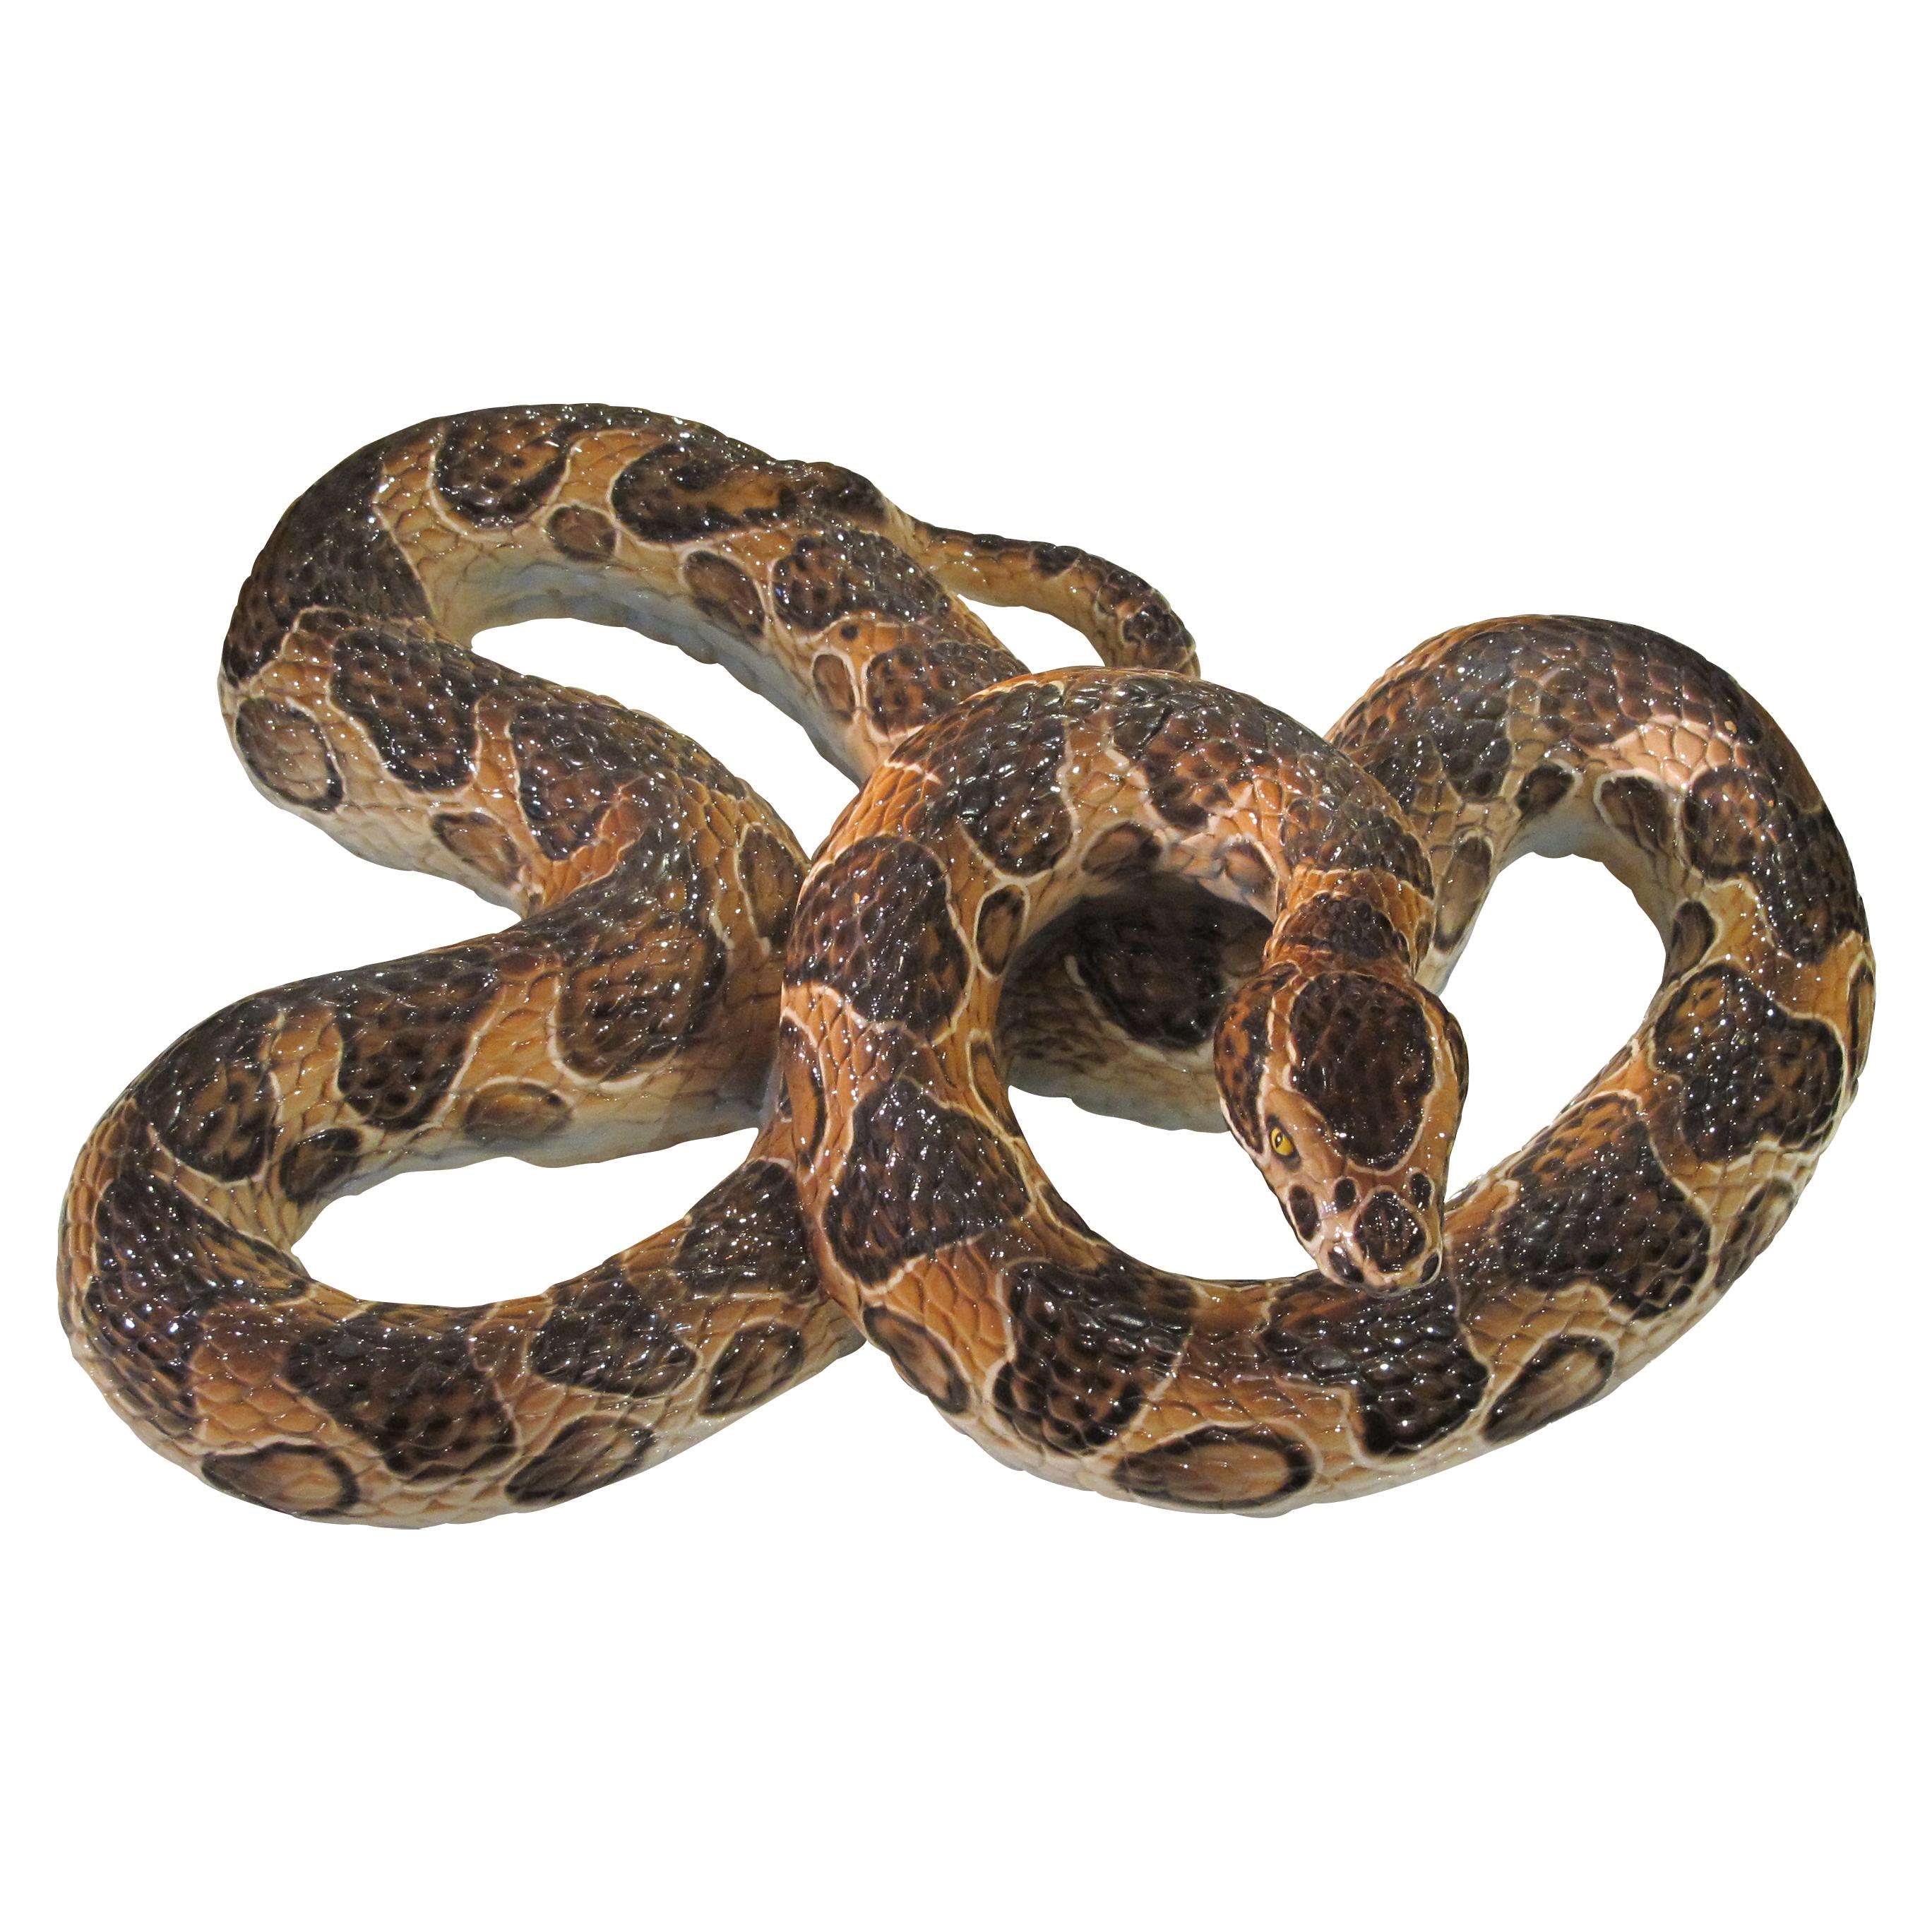 Highly decorative, rare model of large hand-crafted ceramic snake, mid-century Italian. This is a very large lifelike model of a python ball snake with striking detail in colour and in texture. The curves and the posture of the snake are